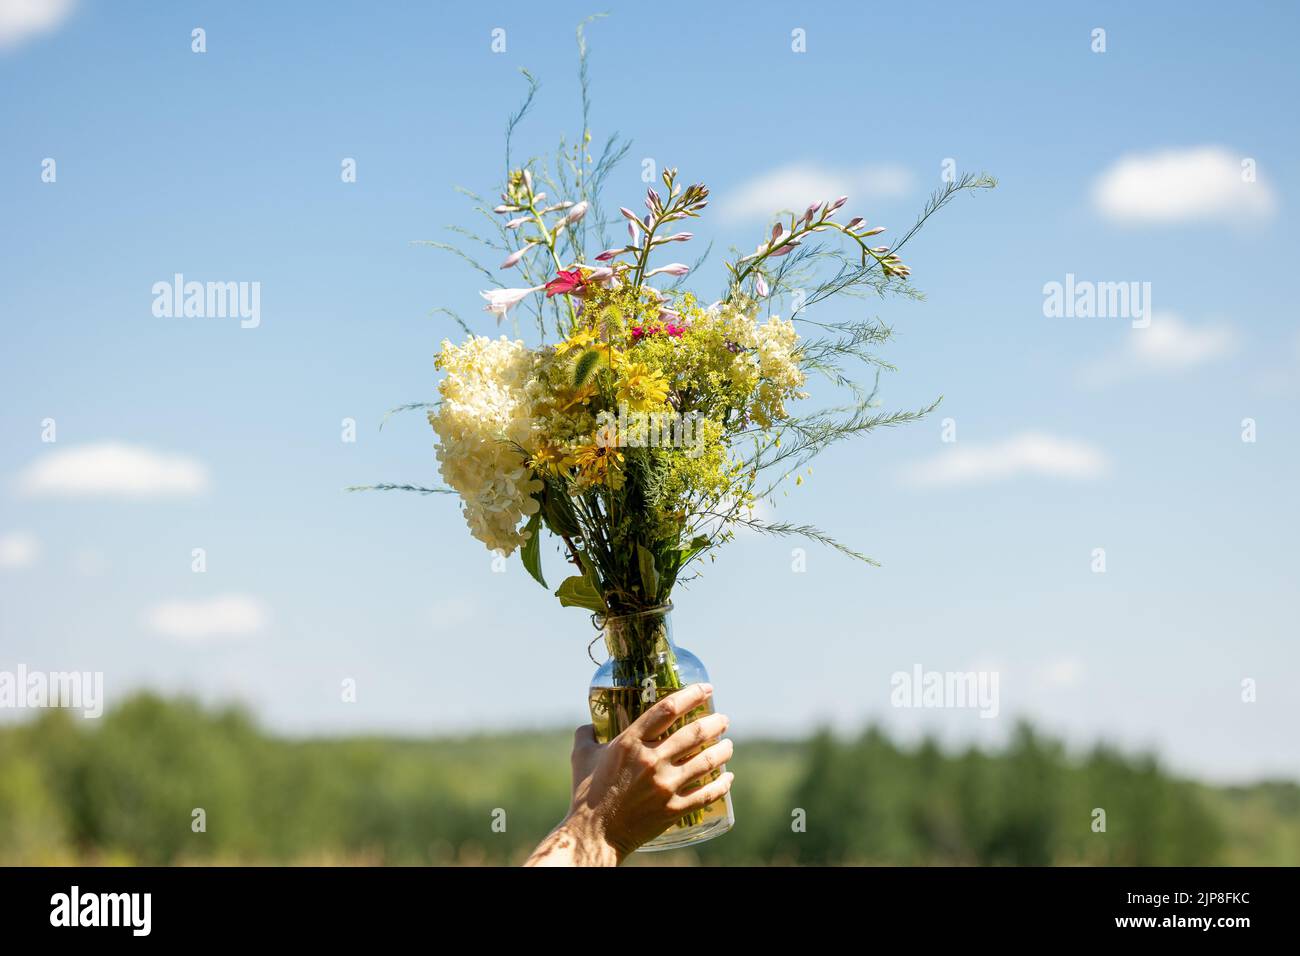 A hand holding a jar with field flowers with a blurred background of sky Stock Photo